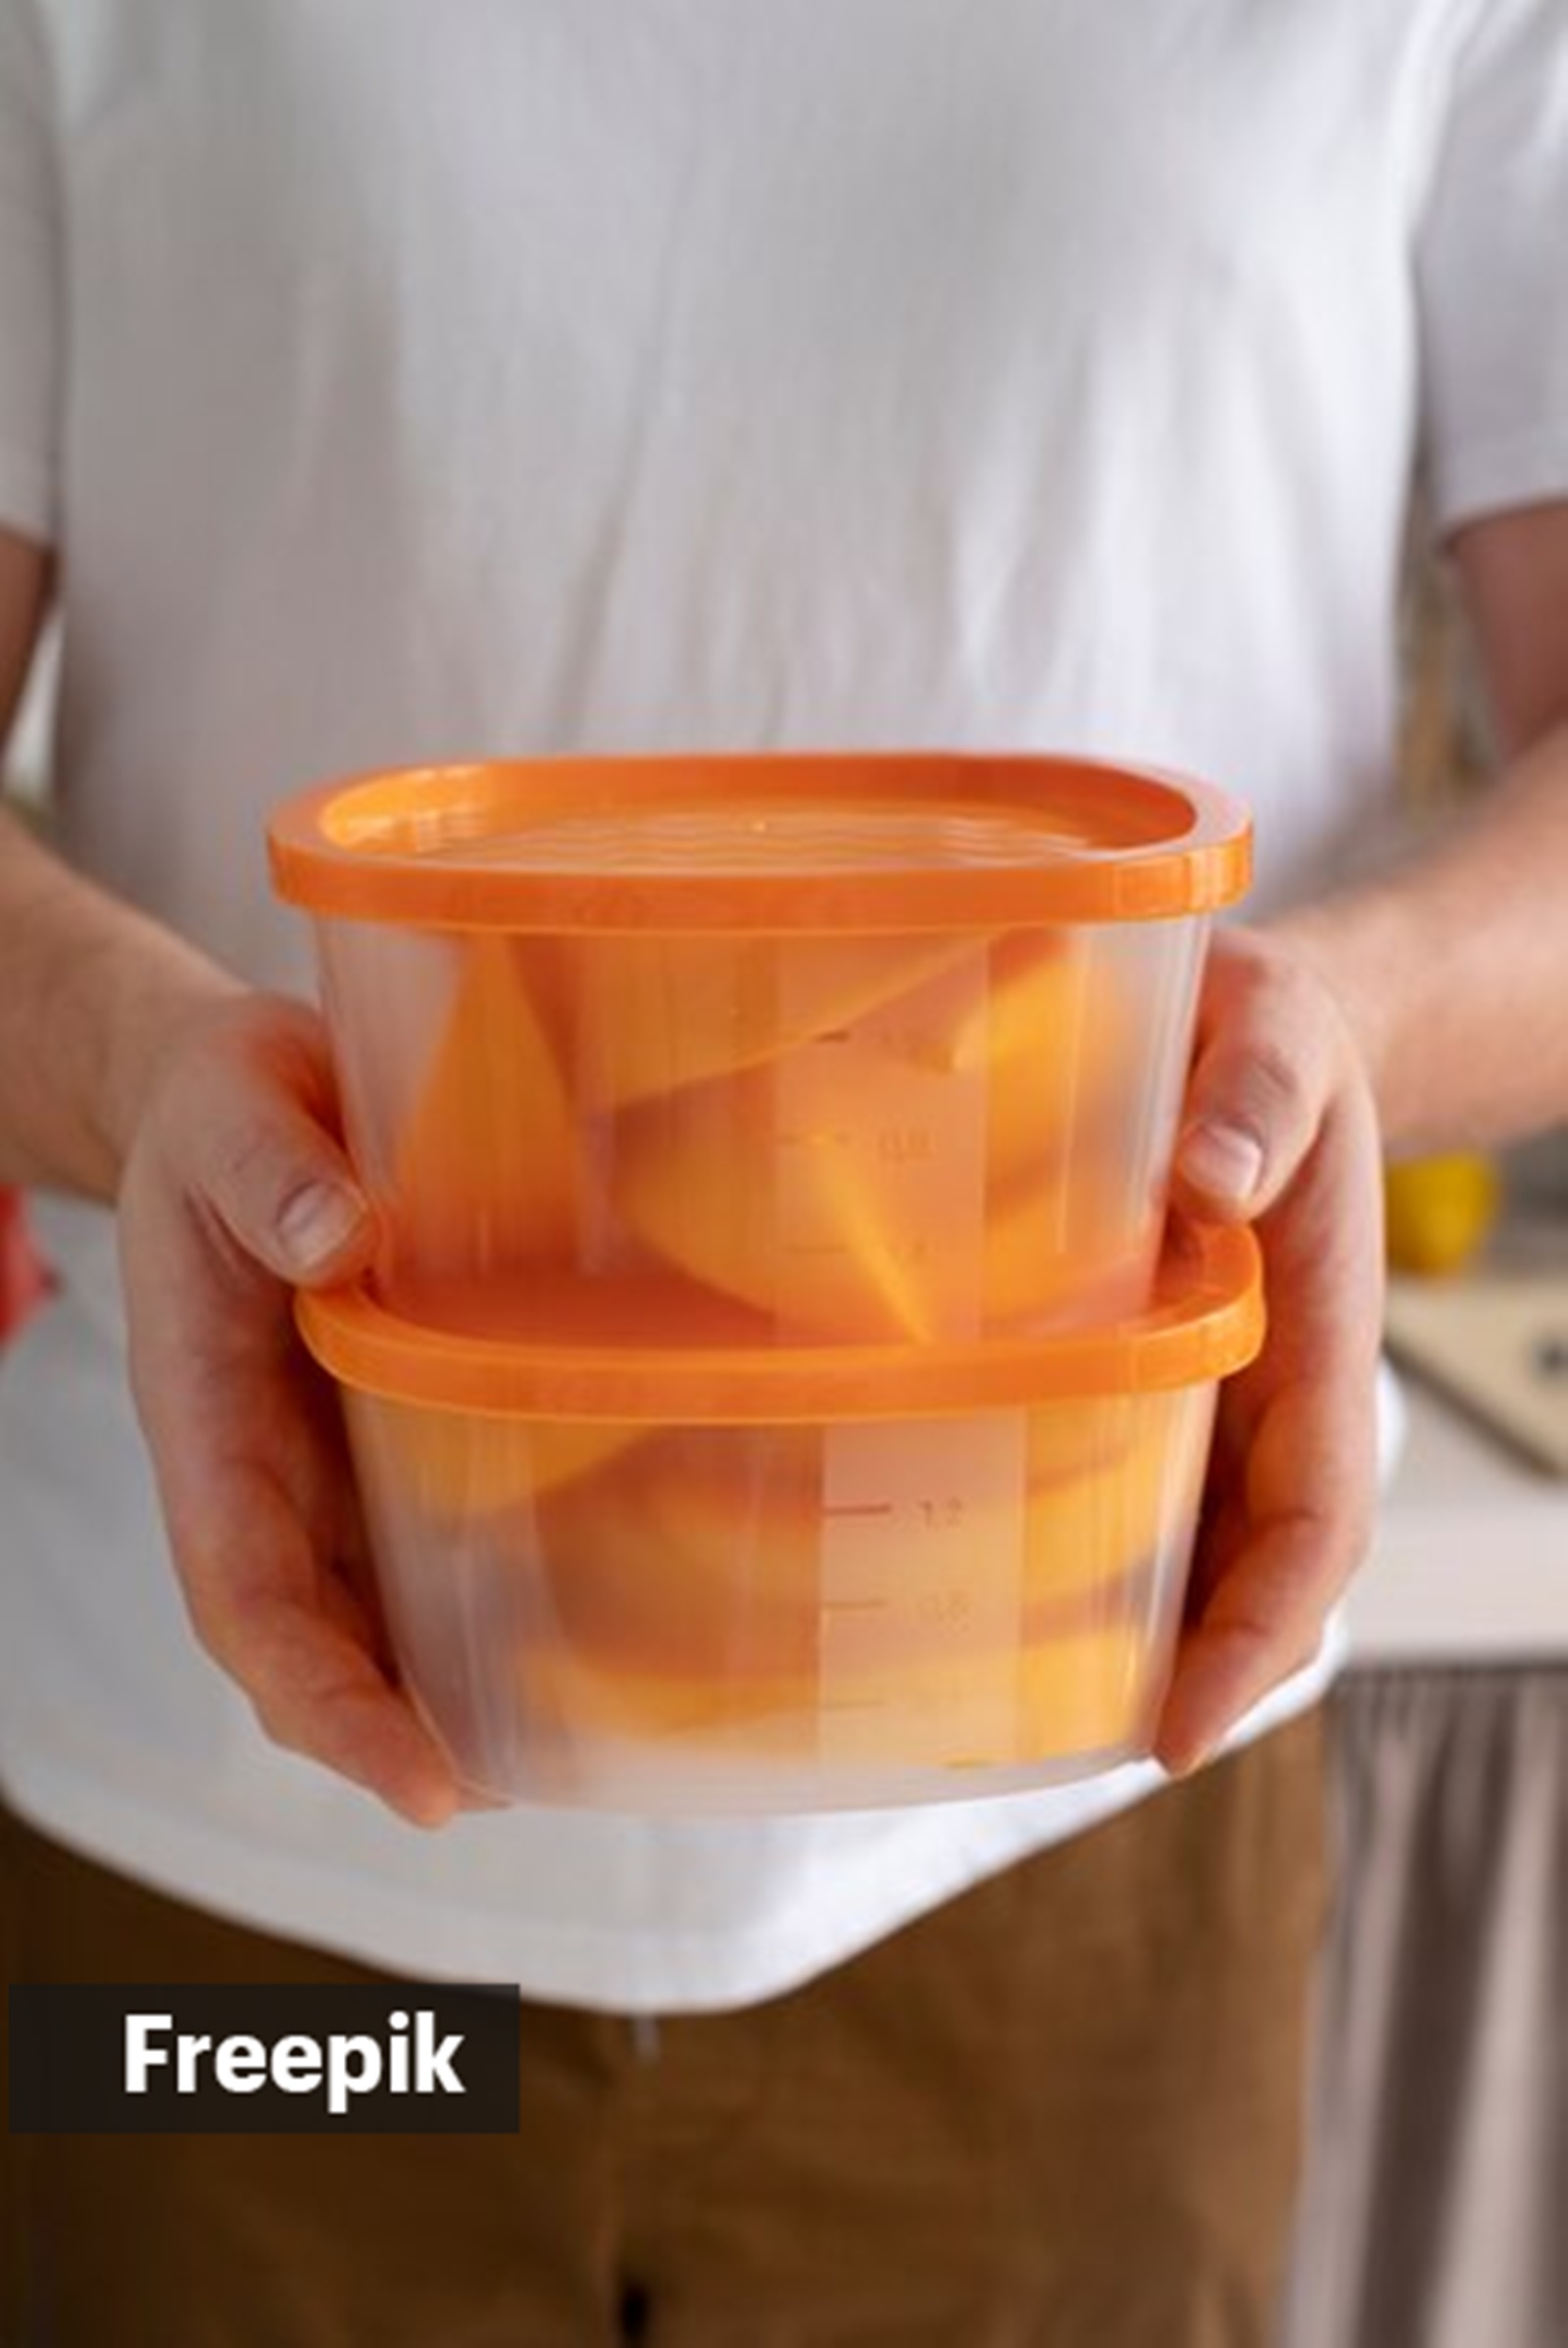 What do those tiny labels on your plastic containers mean?